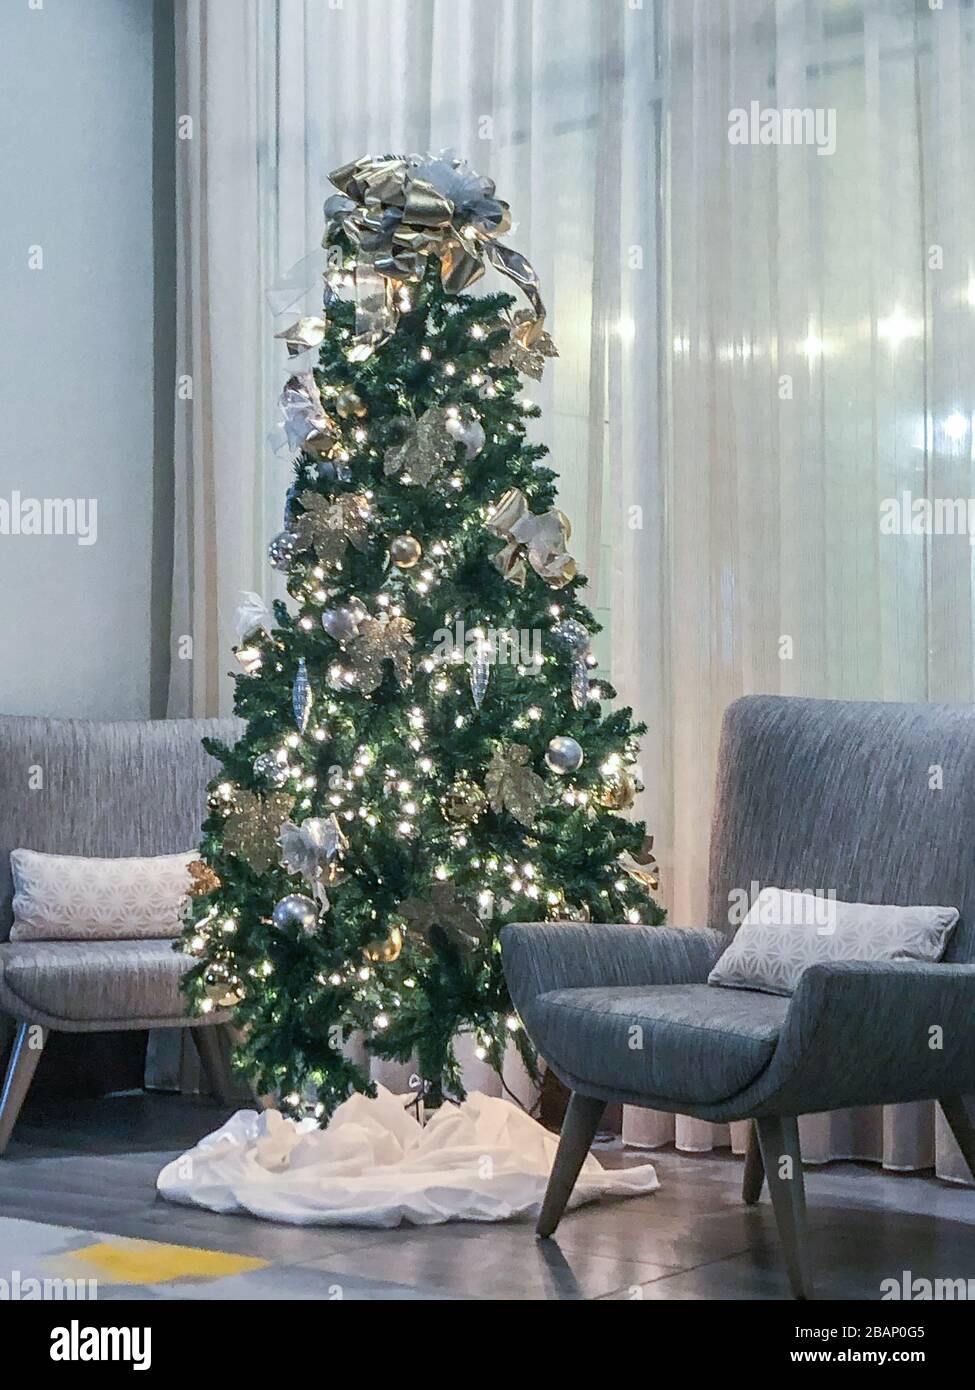 Interior shot of a Christmas tree surrounded by modern chairs in a business lobby area Stock Photo